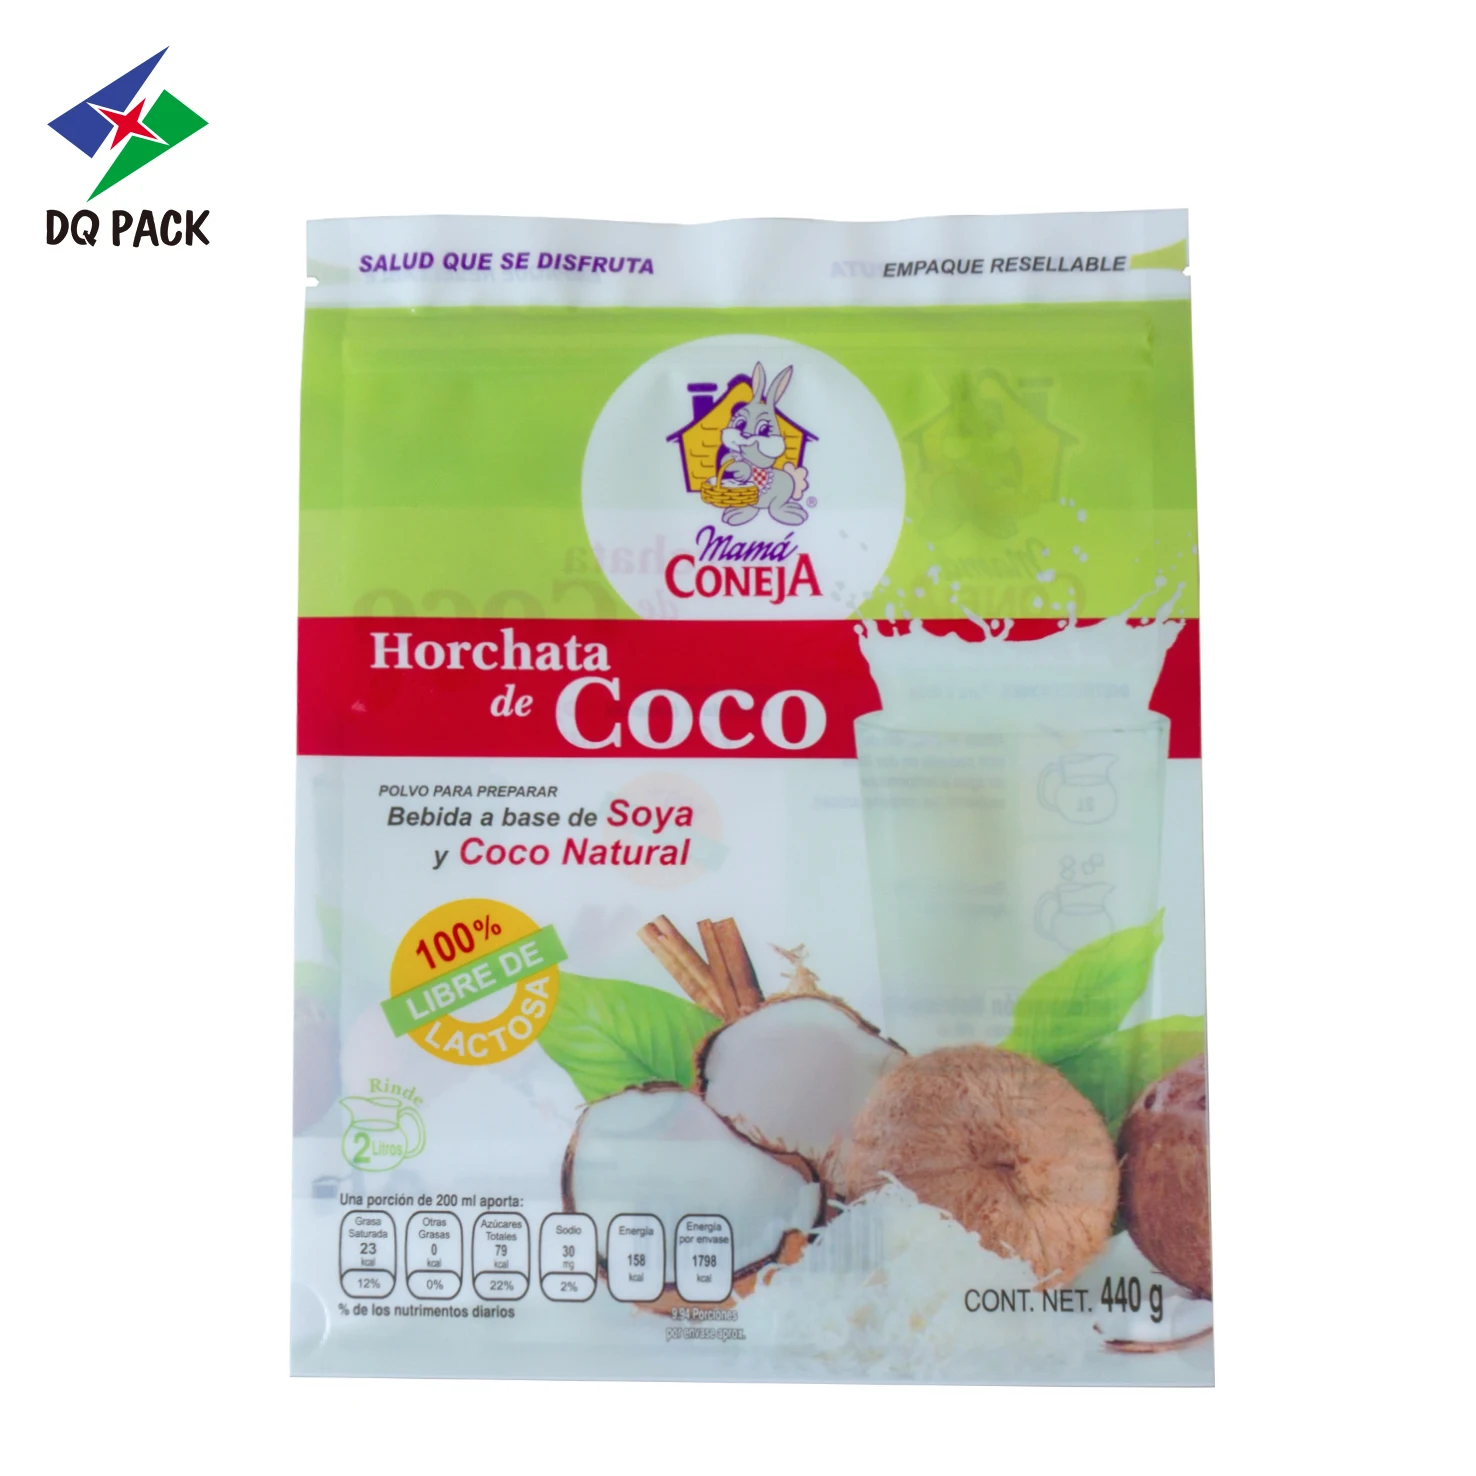 Coco stand up pouch with zipper food packaging